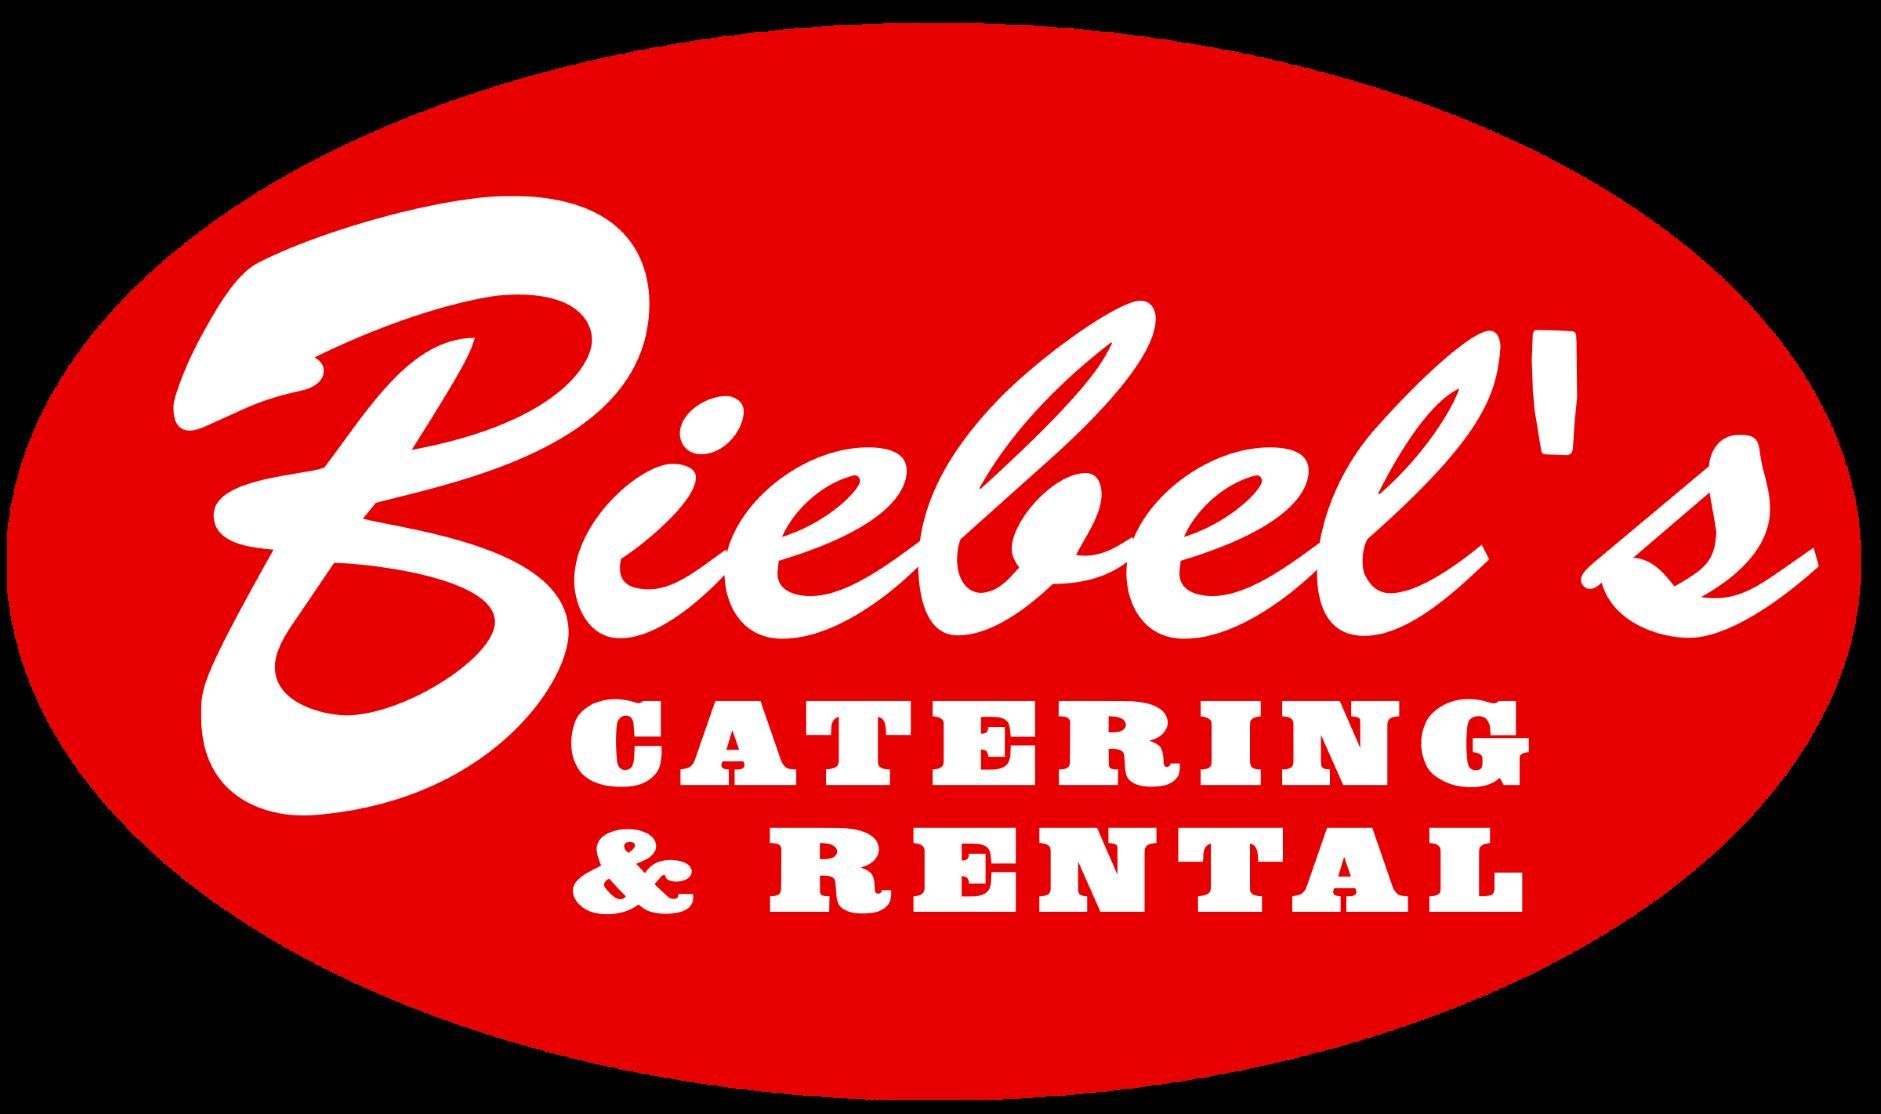 Biebel's Catering and Rental